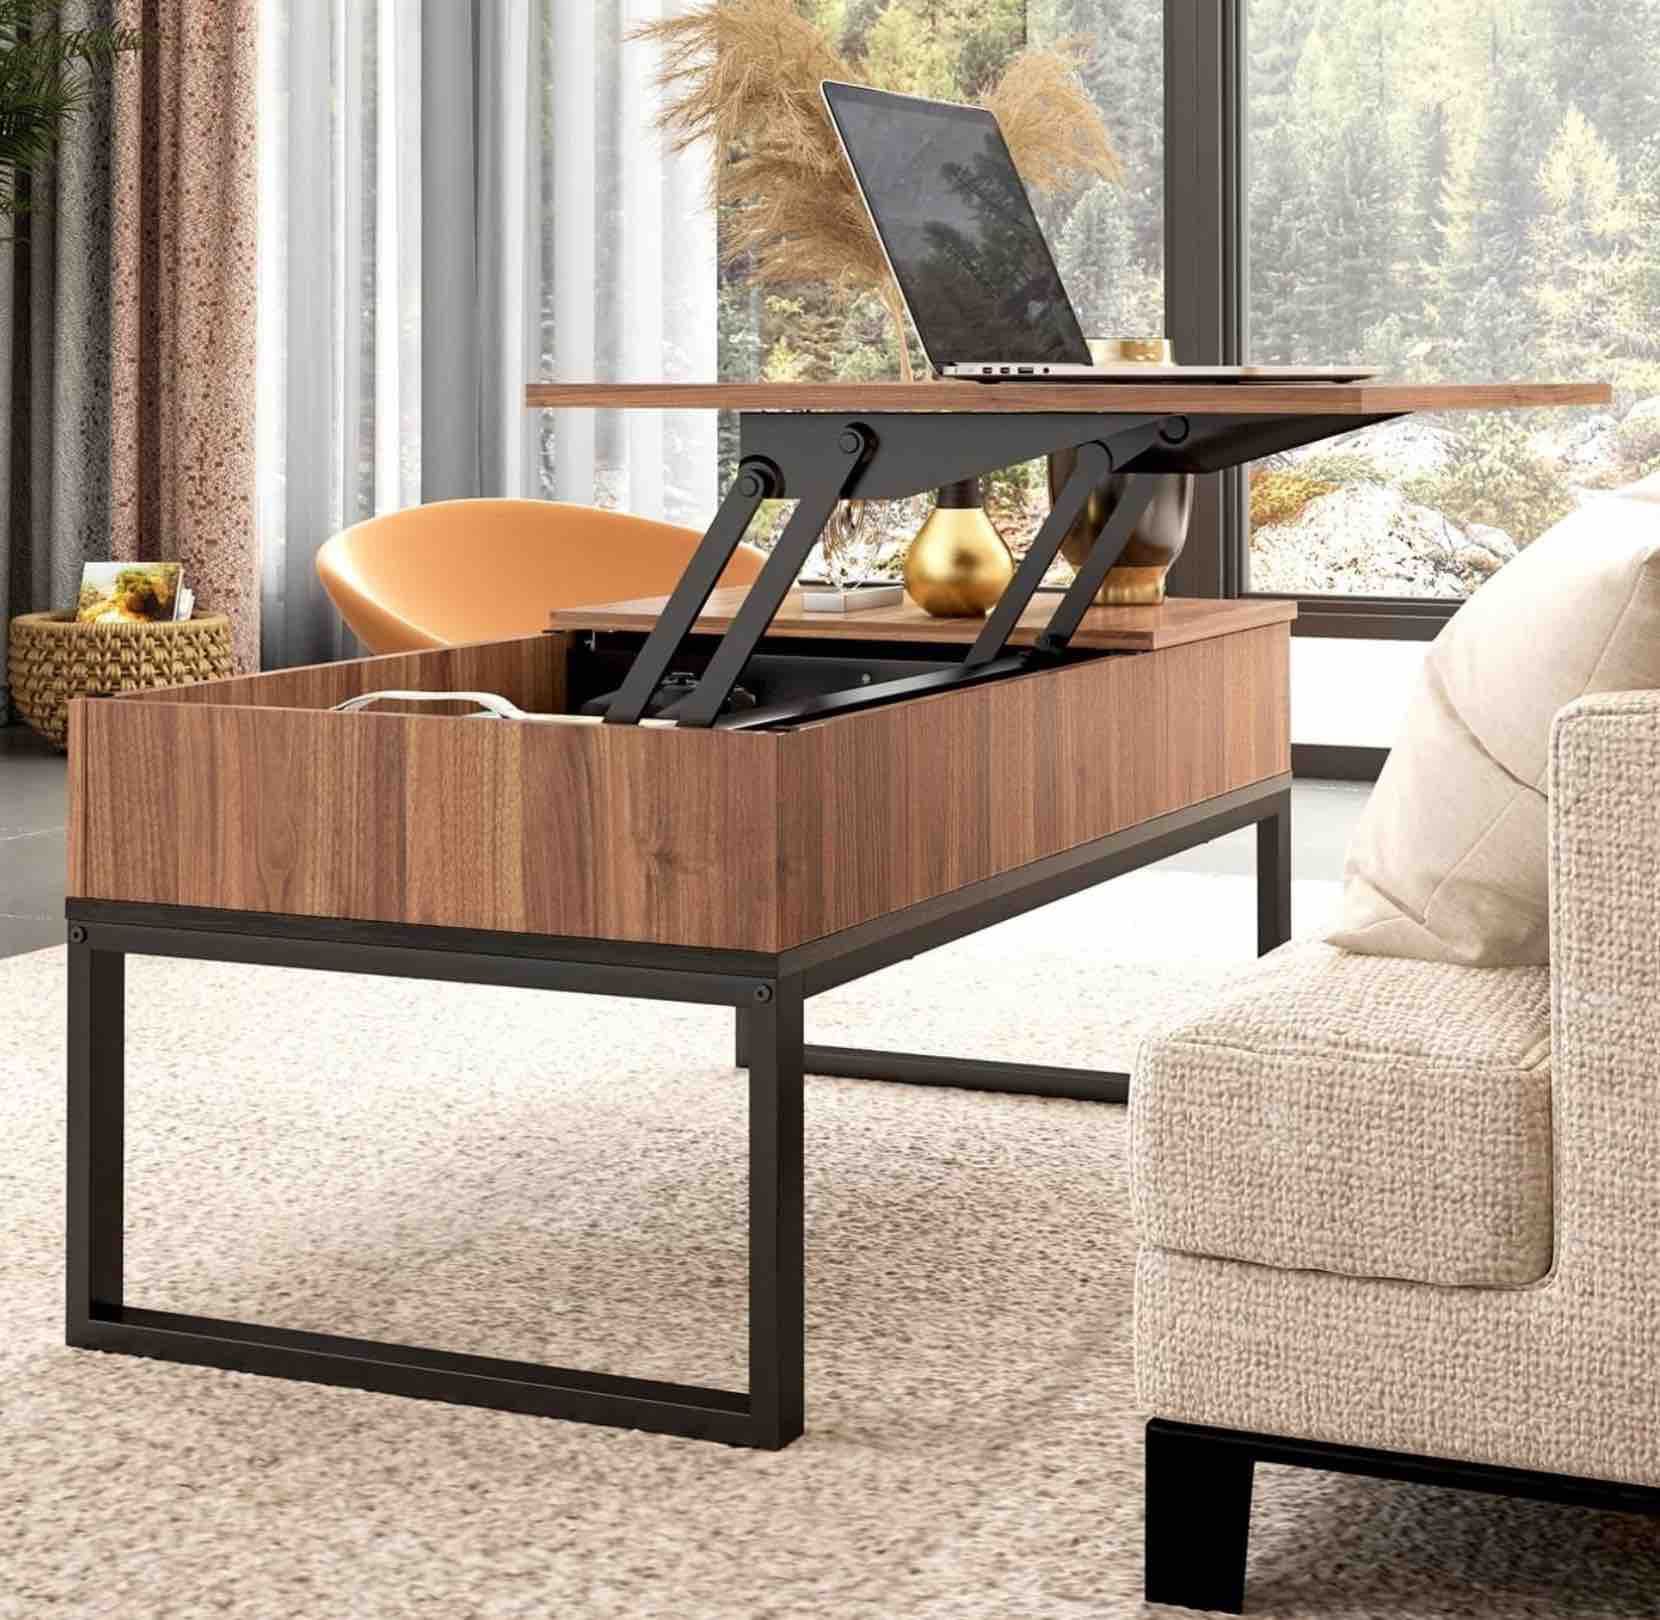 Wlive Pop Up Coffee Table With Hidden Storage Compartments — Tools And Toys Inside Lift Top Coffee Tables With Hidden Storage Compartments (Photo 14 of 15)